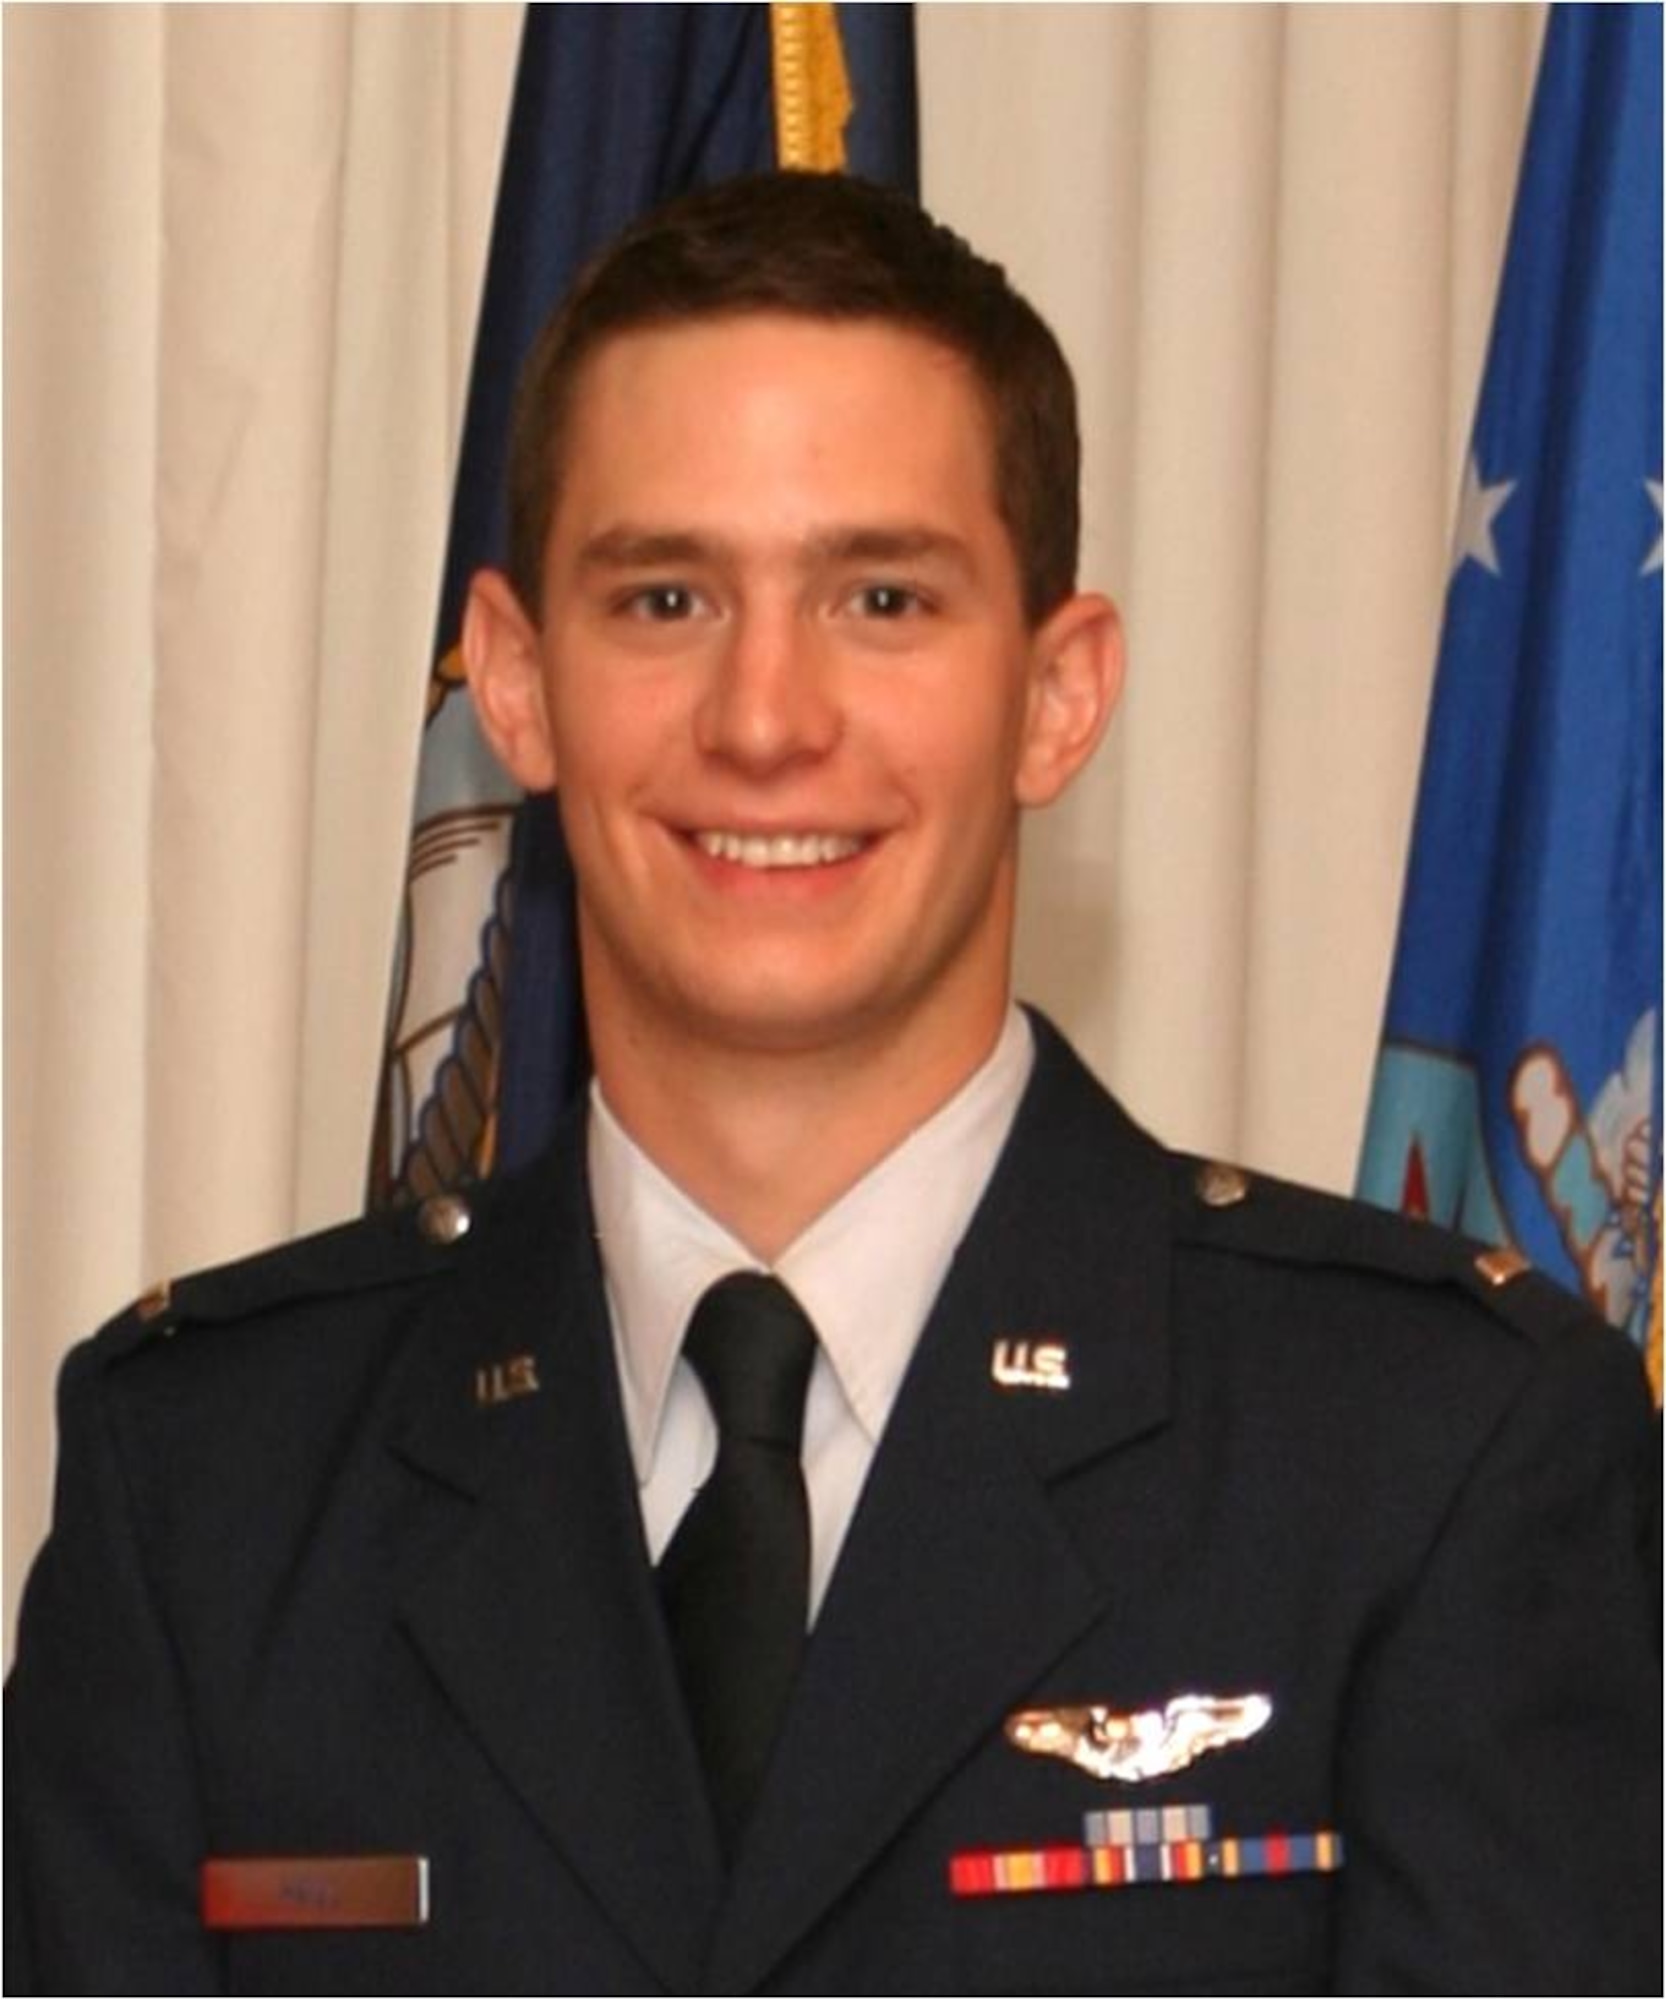 Capt. Ryan P. Hall, 30, was a U-28A pilot on his seventh deployment. He entered the Air Force in 2004, receiving his commission through the Reserve Officer Training Corp at The Citadel. He had been assigned to the 319th Special Operations Squadron at Hurlburt Field since 2007 and had more than 1,300 combat flight hours.  Hall died Feb. 18 when his U-28A was involved in an accident near Camp Lemonnier, Djibouti, located in the Horn of Africa. (Courtesy photo)